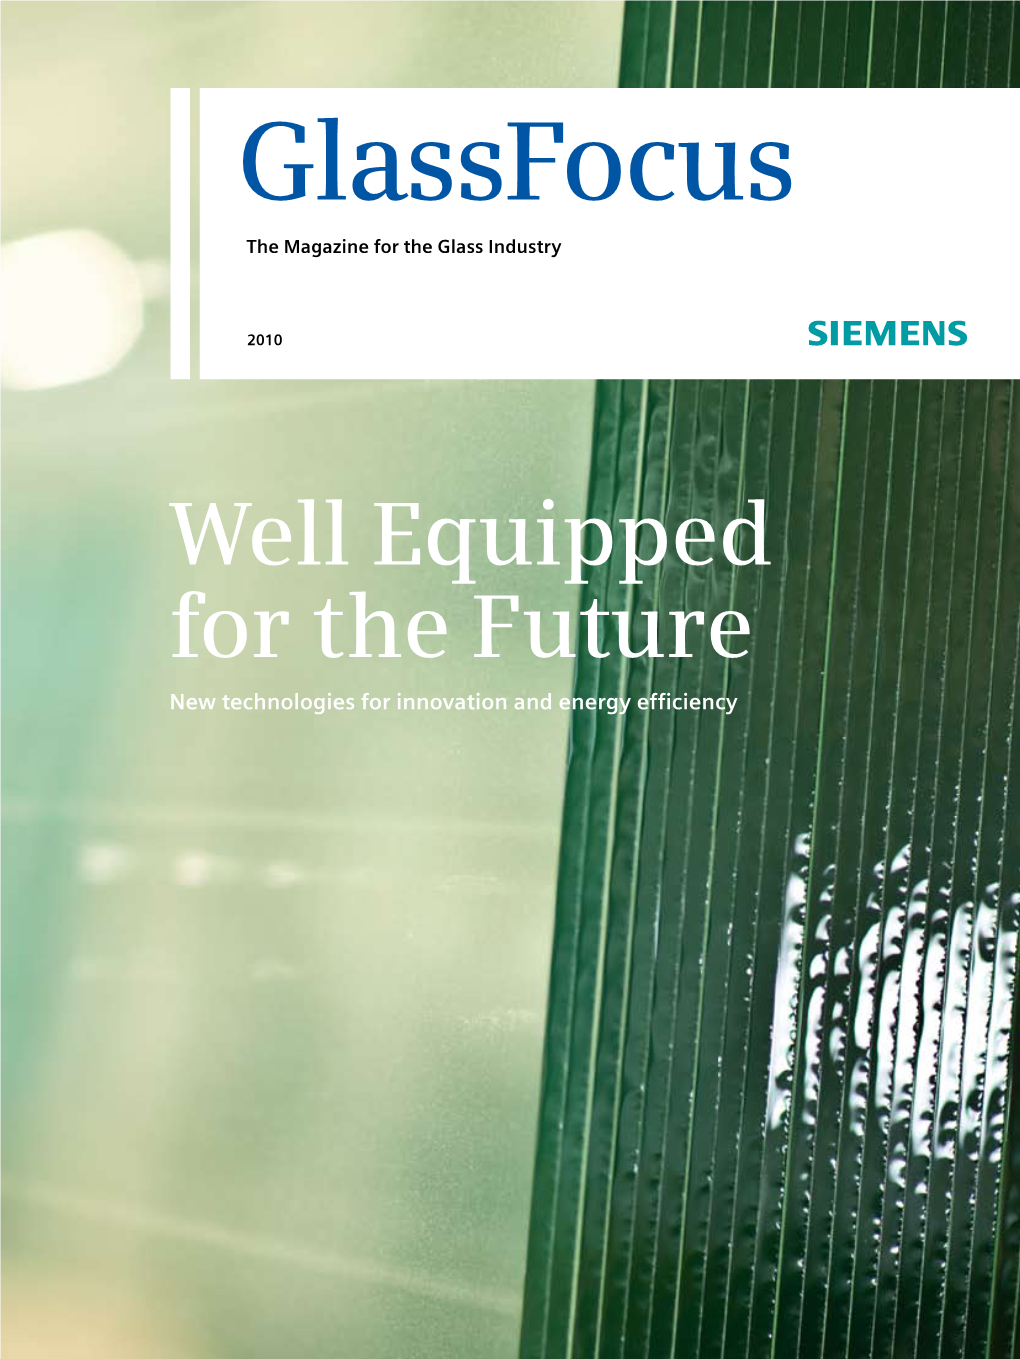 Glassfocus the Magazine for the Glass Industry